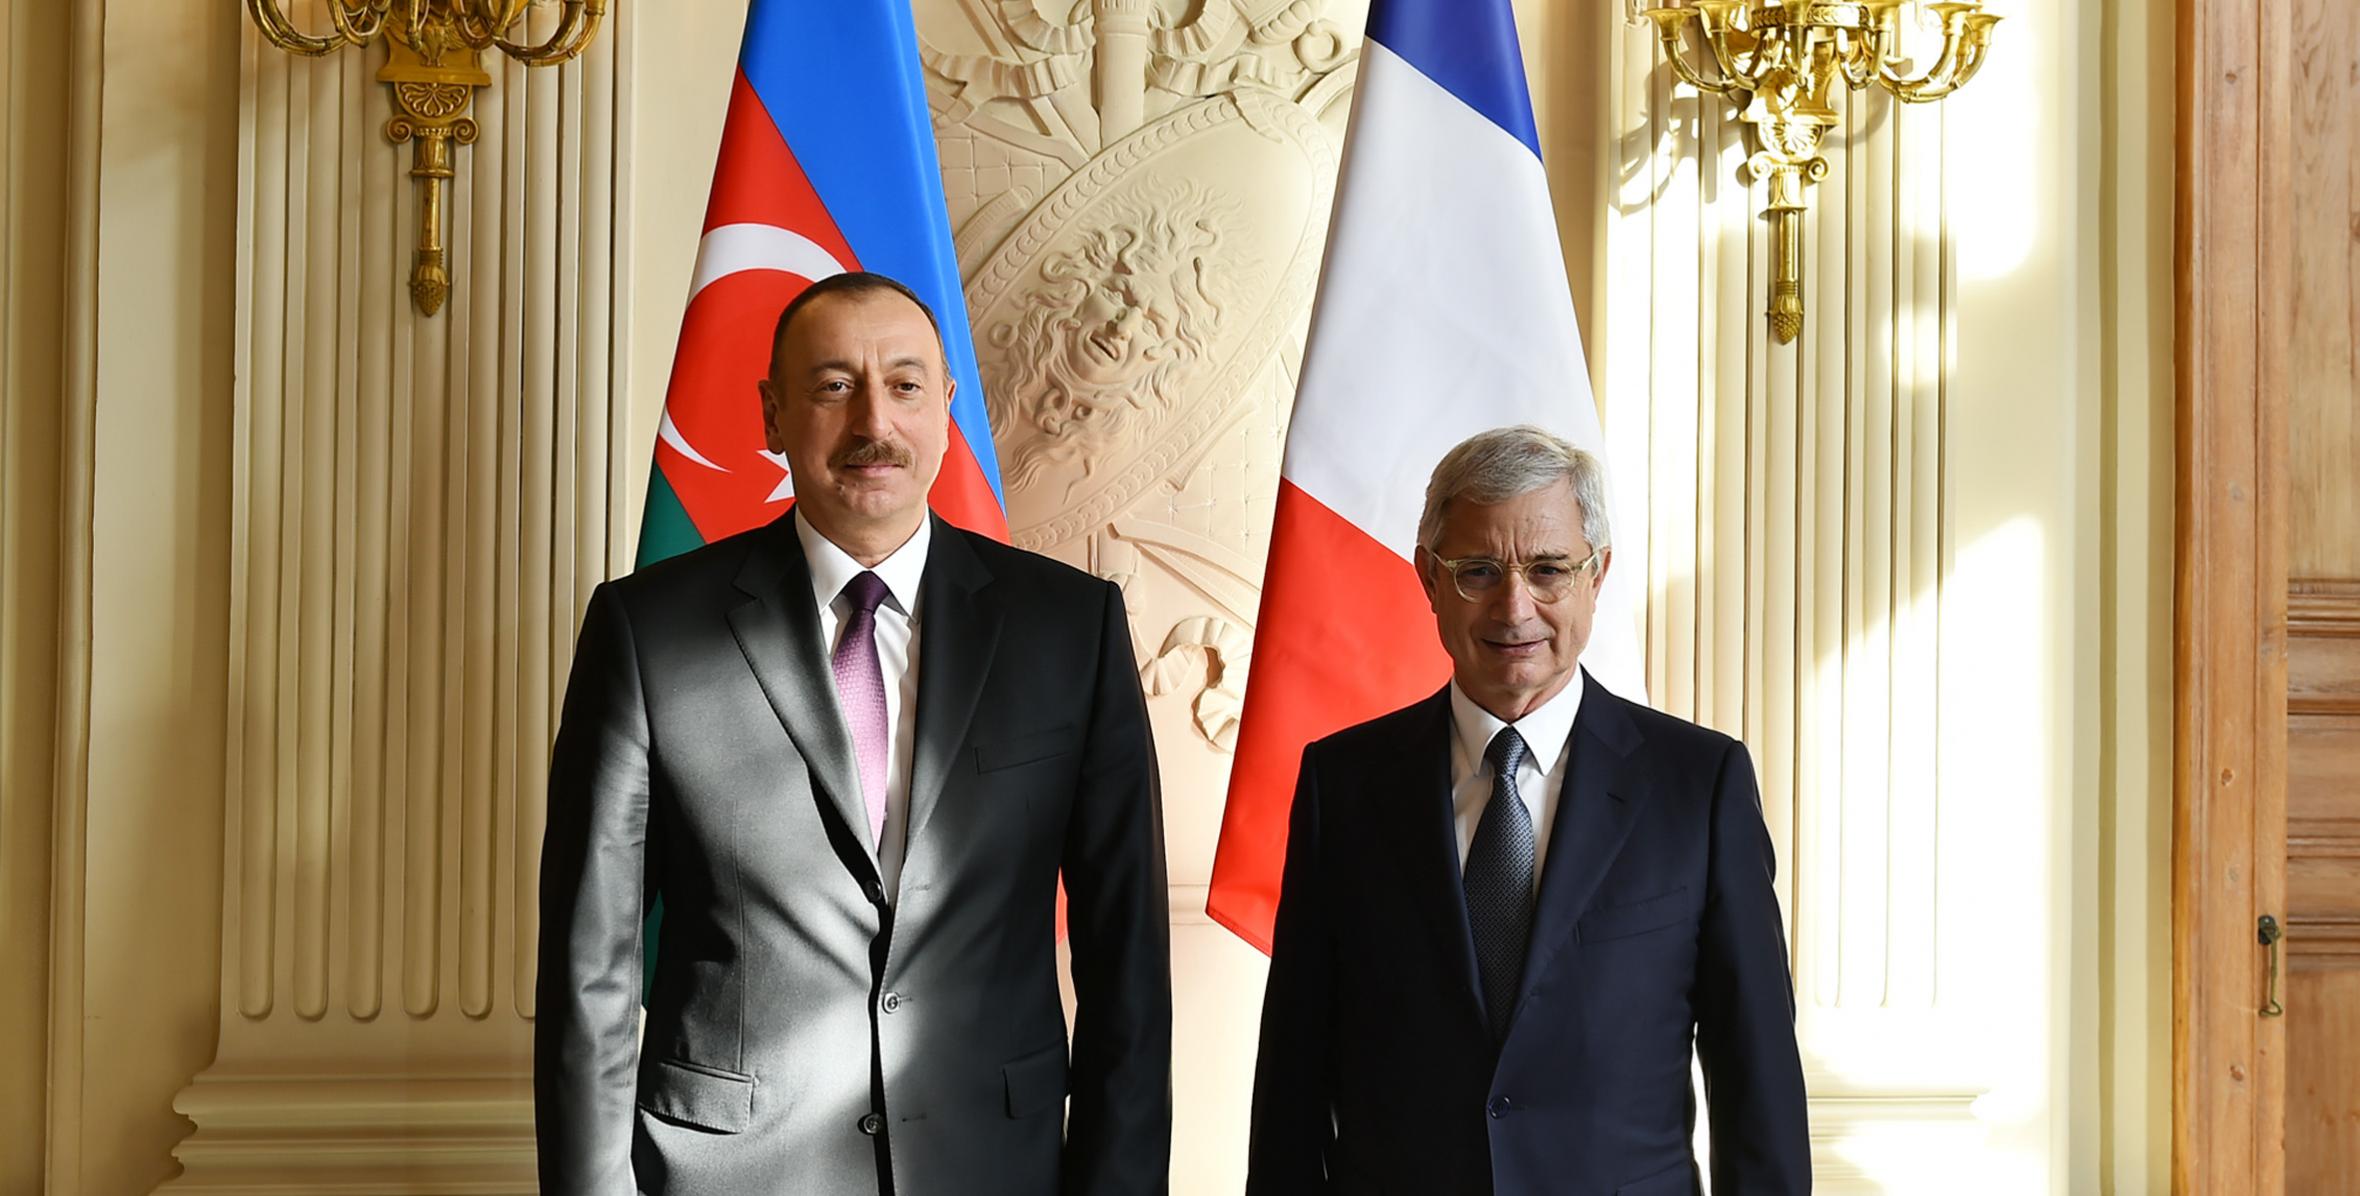 Ilham Aliyev met with President of French National Assembly